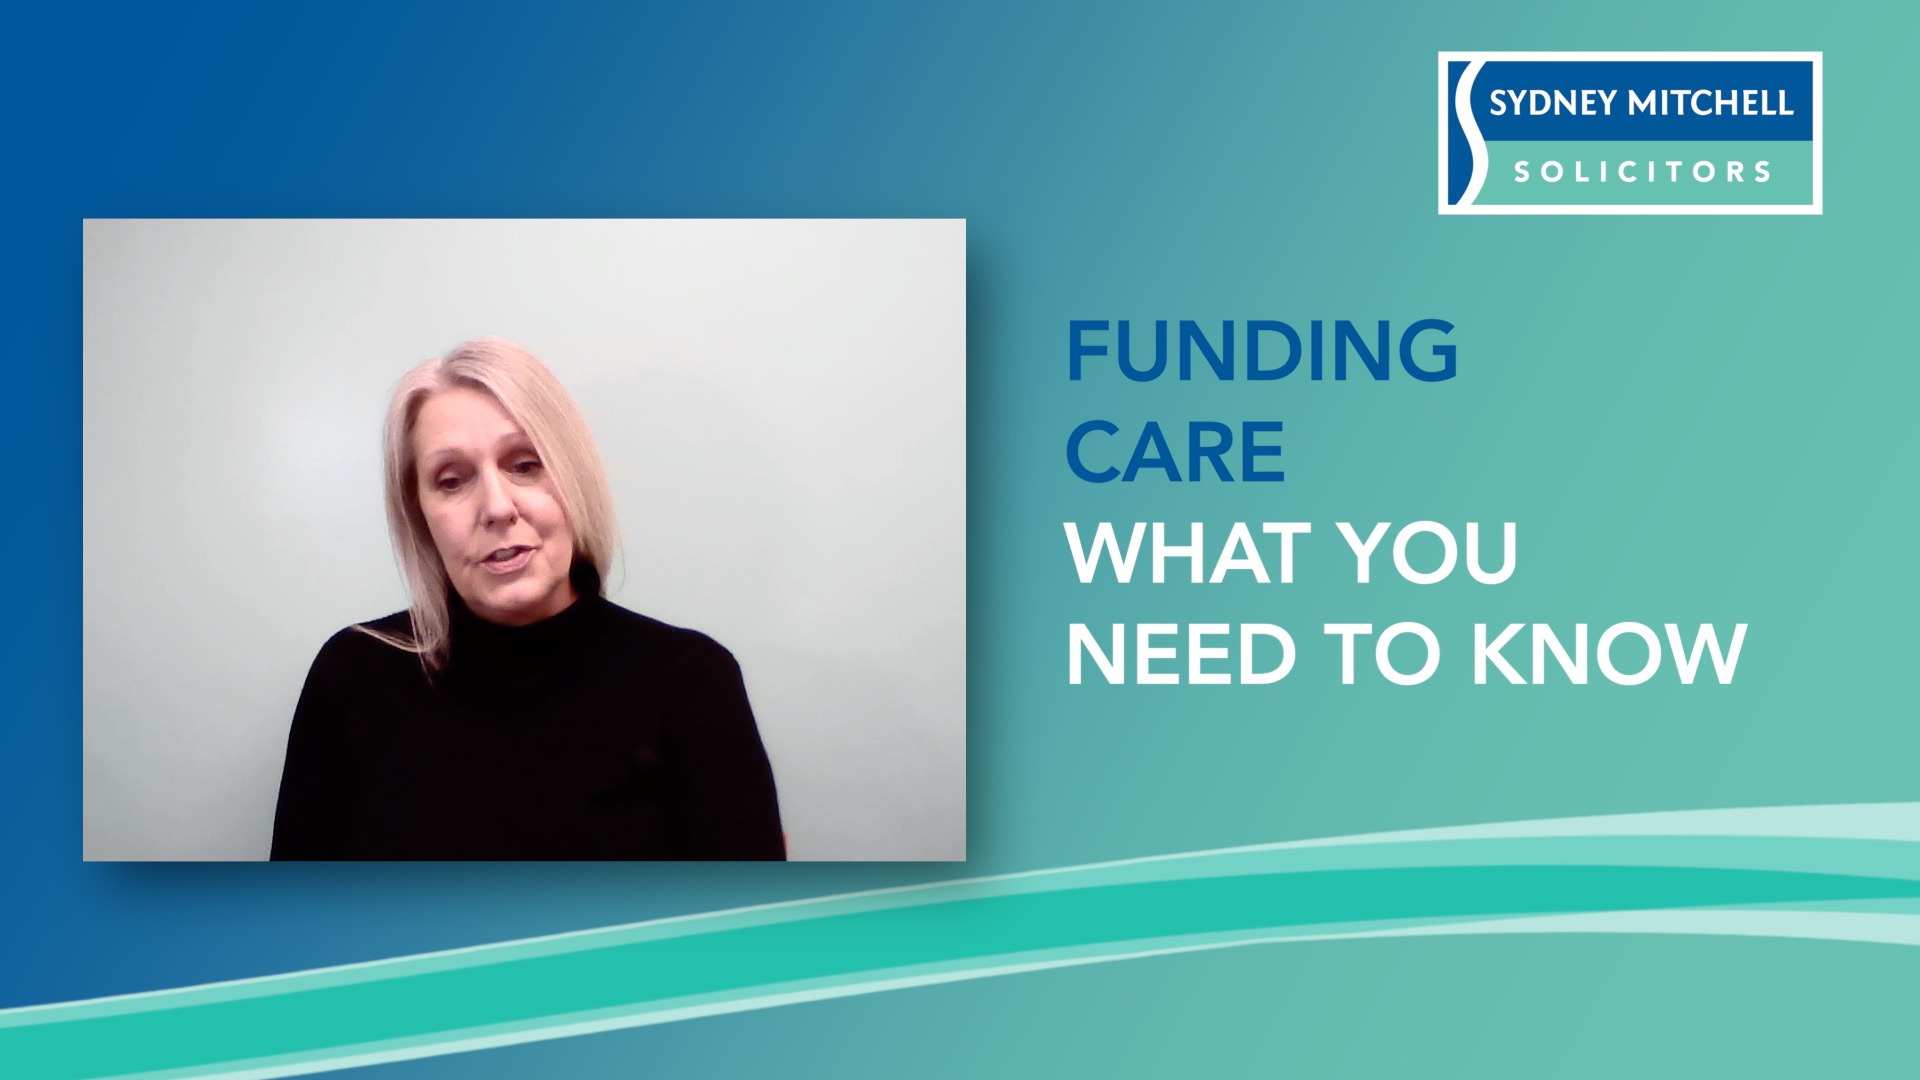 continuing healthcare funding - what you need to know - Tracy Creed Sydney Mitchell LLP